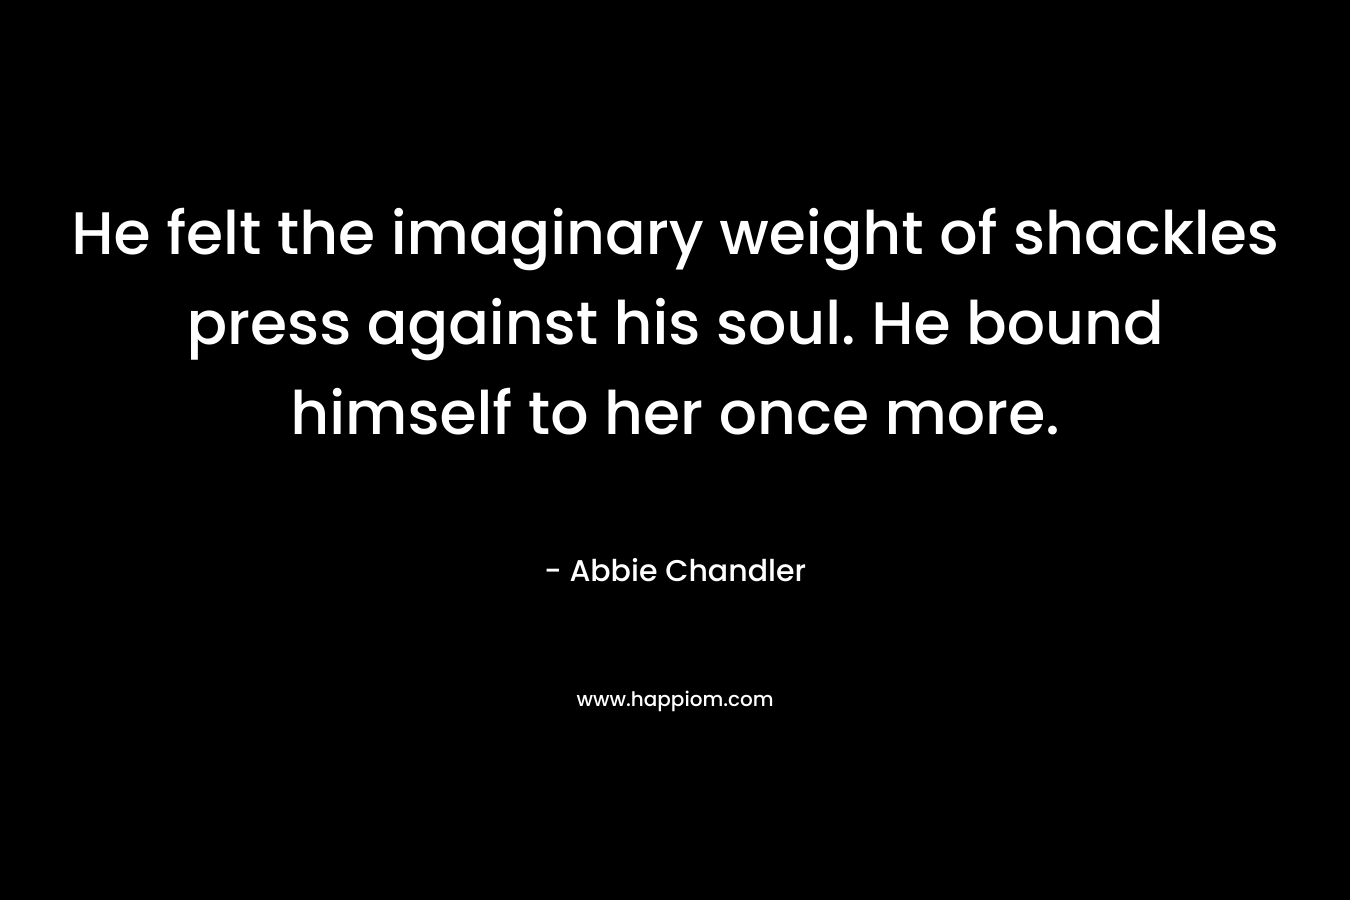 He felt the imaginary weight of shackles press against his soul. He bound himself to her once more. – Abbie Chandler